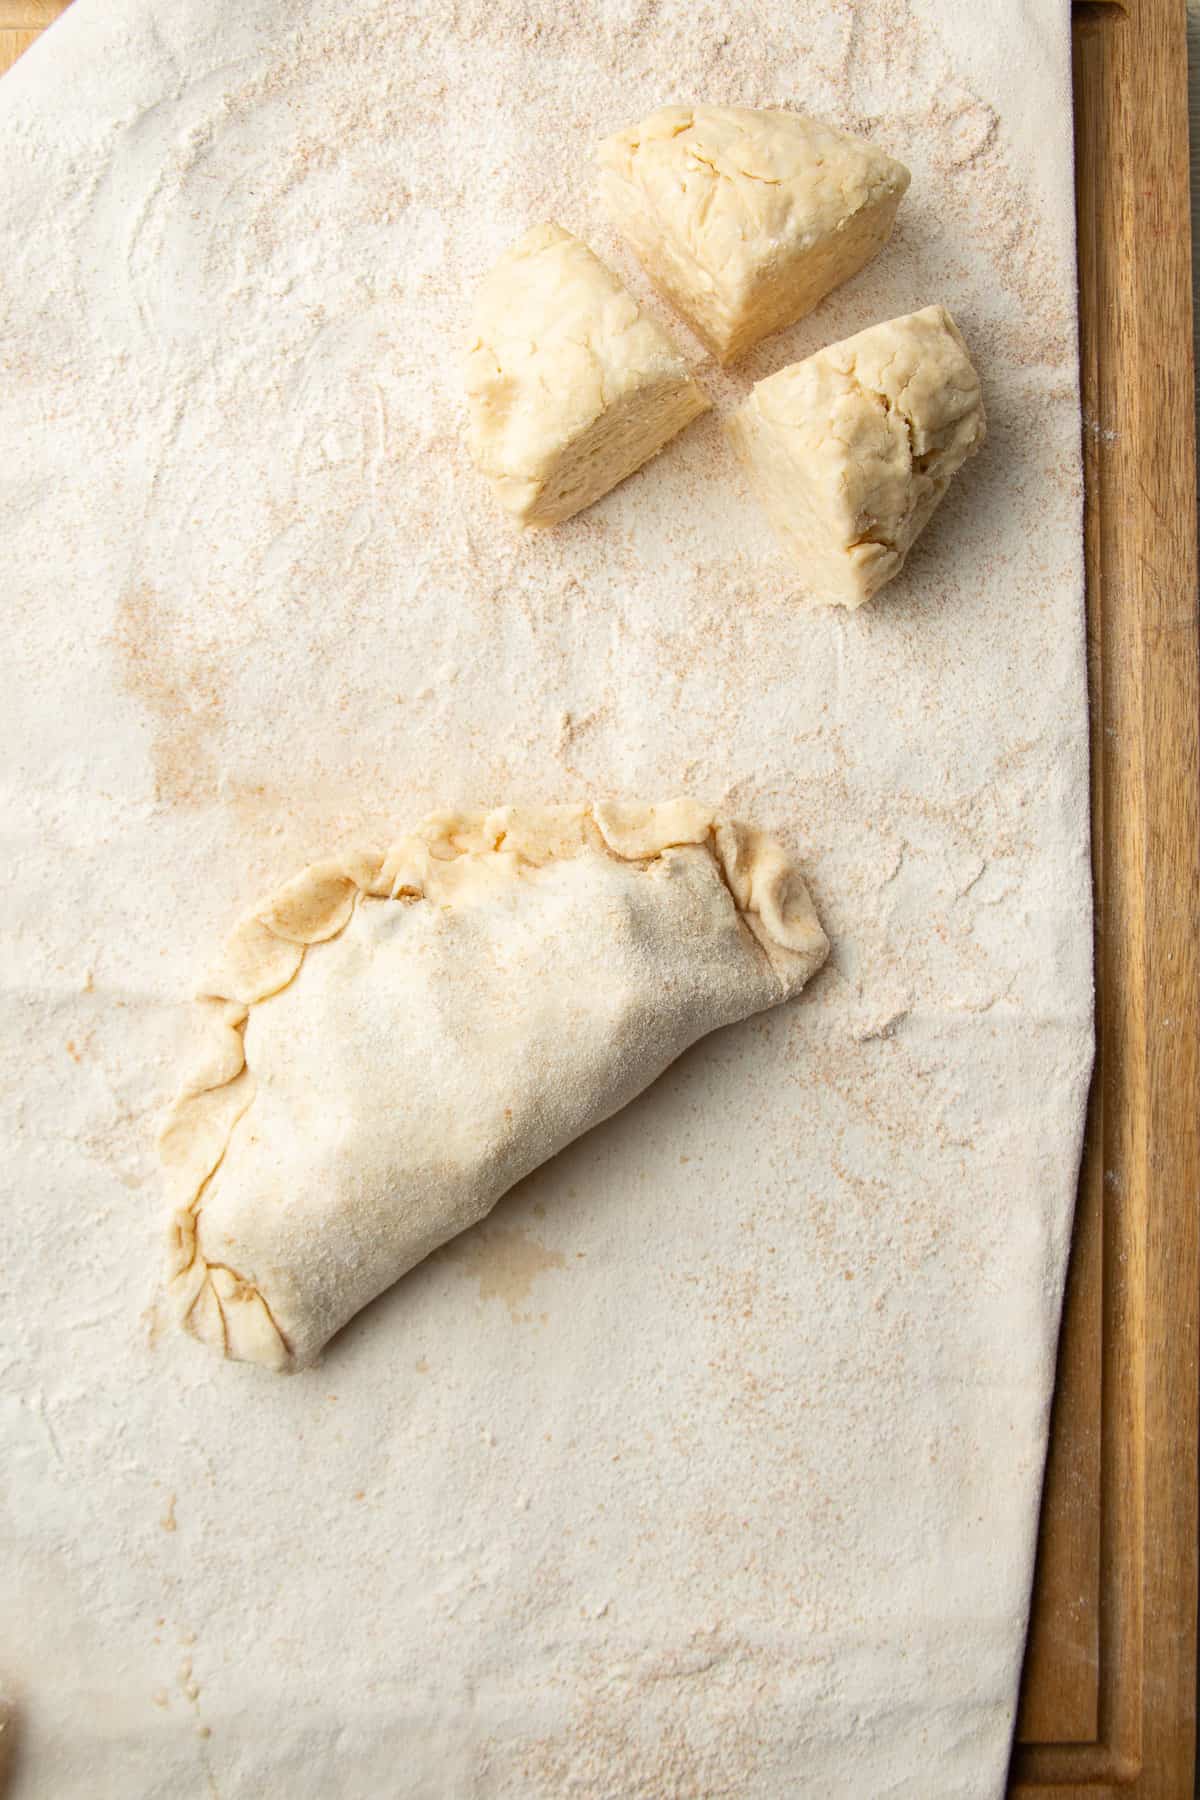 Three chunks of dough and one unbaked Vegan Cornish Pasty on a pastry cloth.